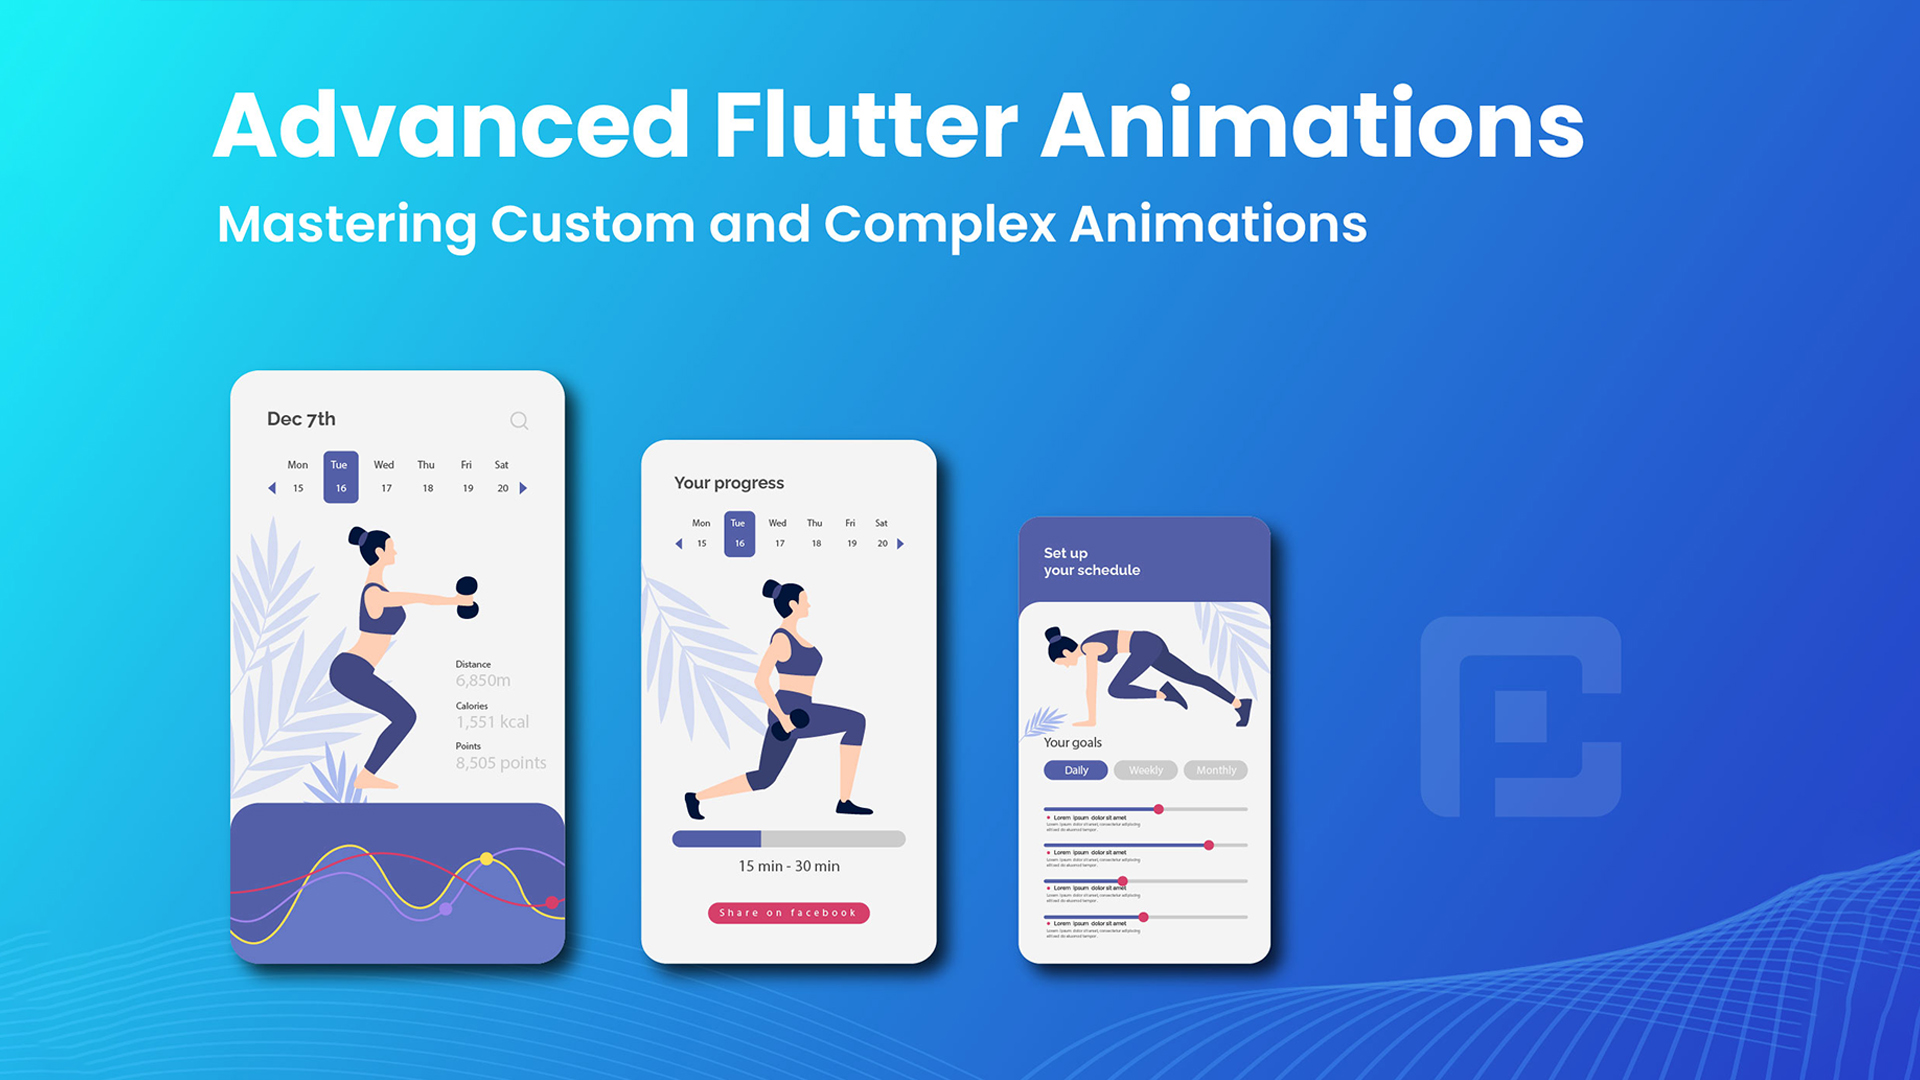 Advanced Flutter Animations: Mastering Custom and Complex Animations